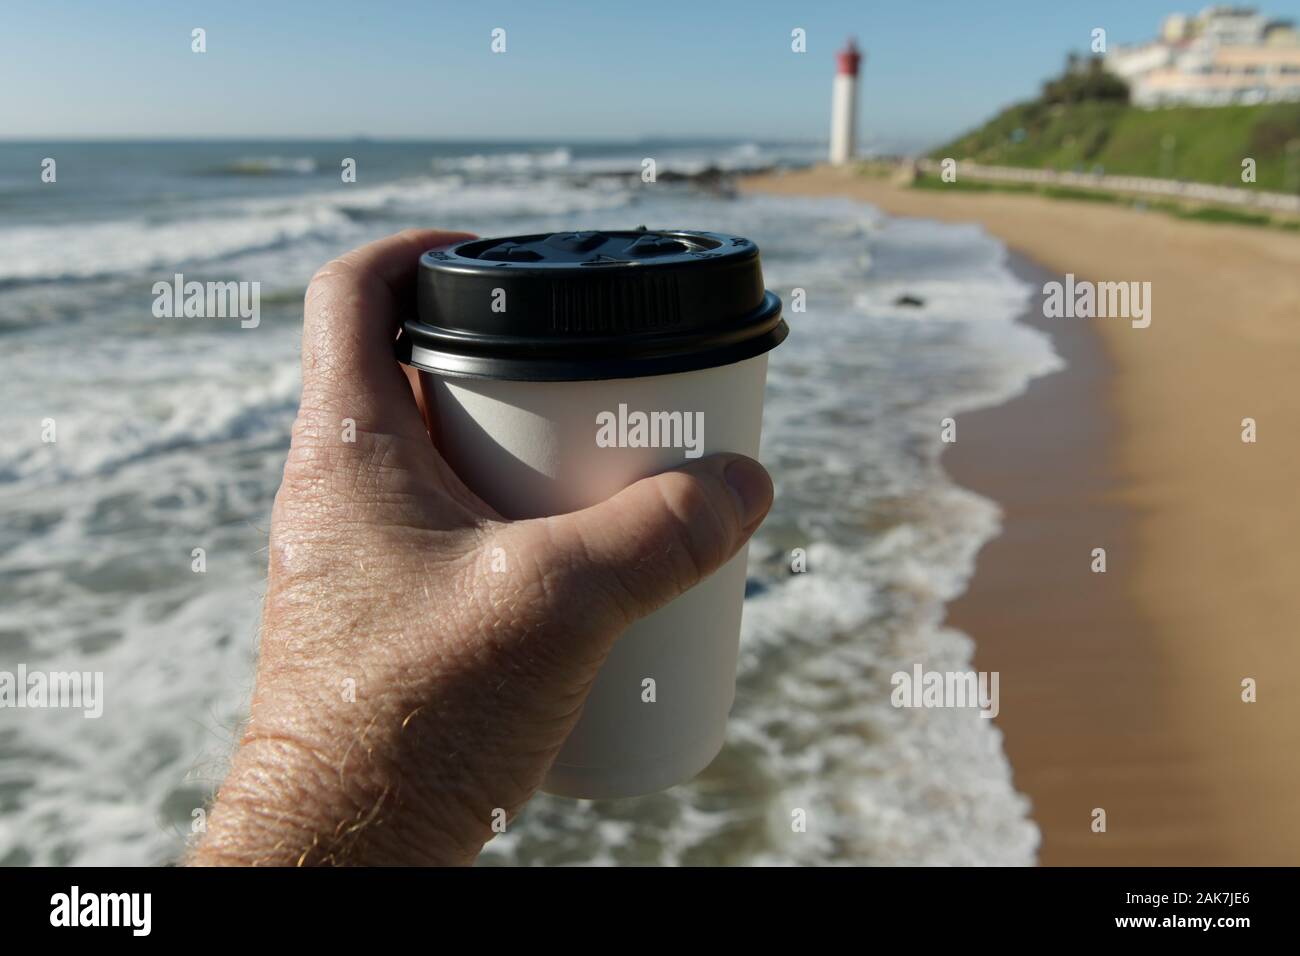 Durban, South Africa, concept, plastic pollution, hand of Author holding single use disposable cup, beach of Umhlanga Rocks waterfront, object Stock Photo